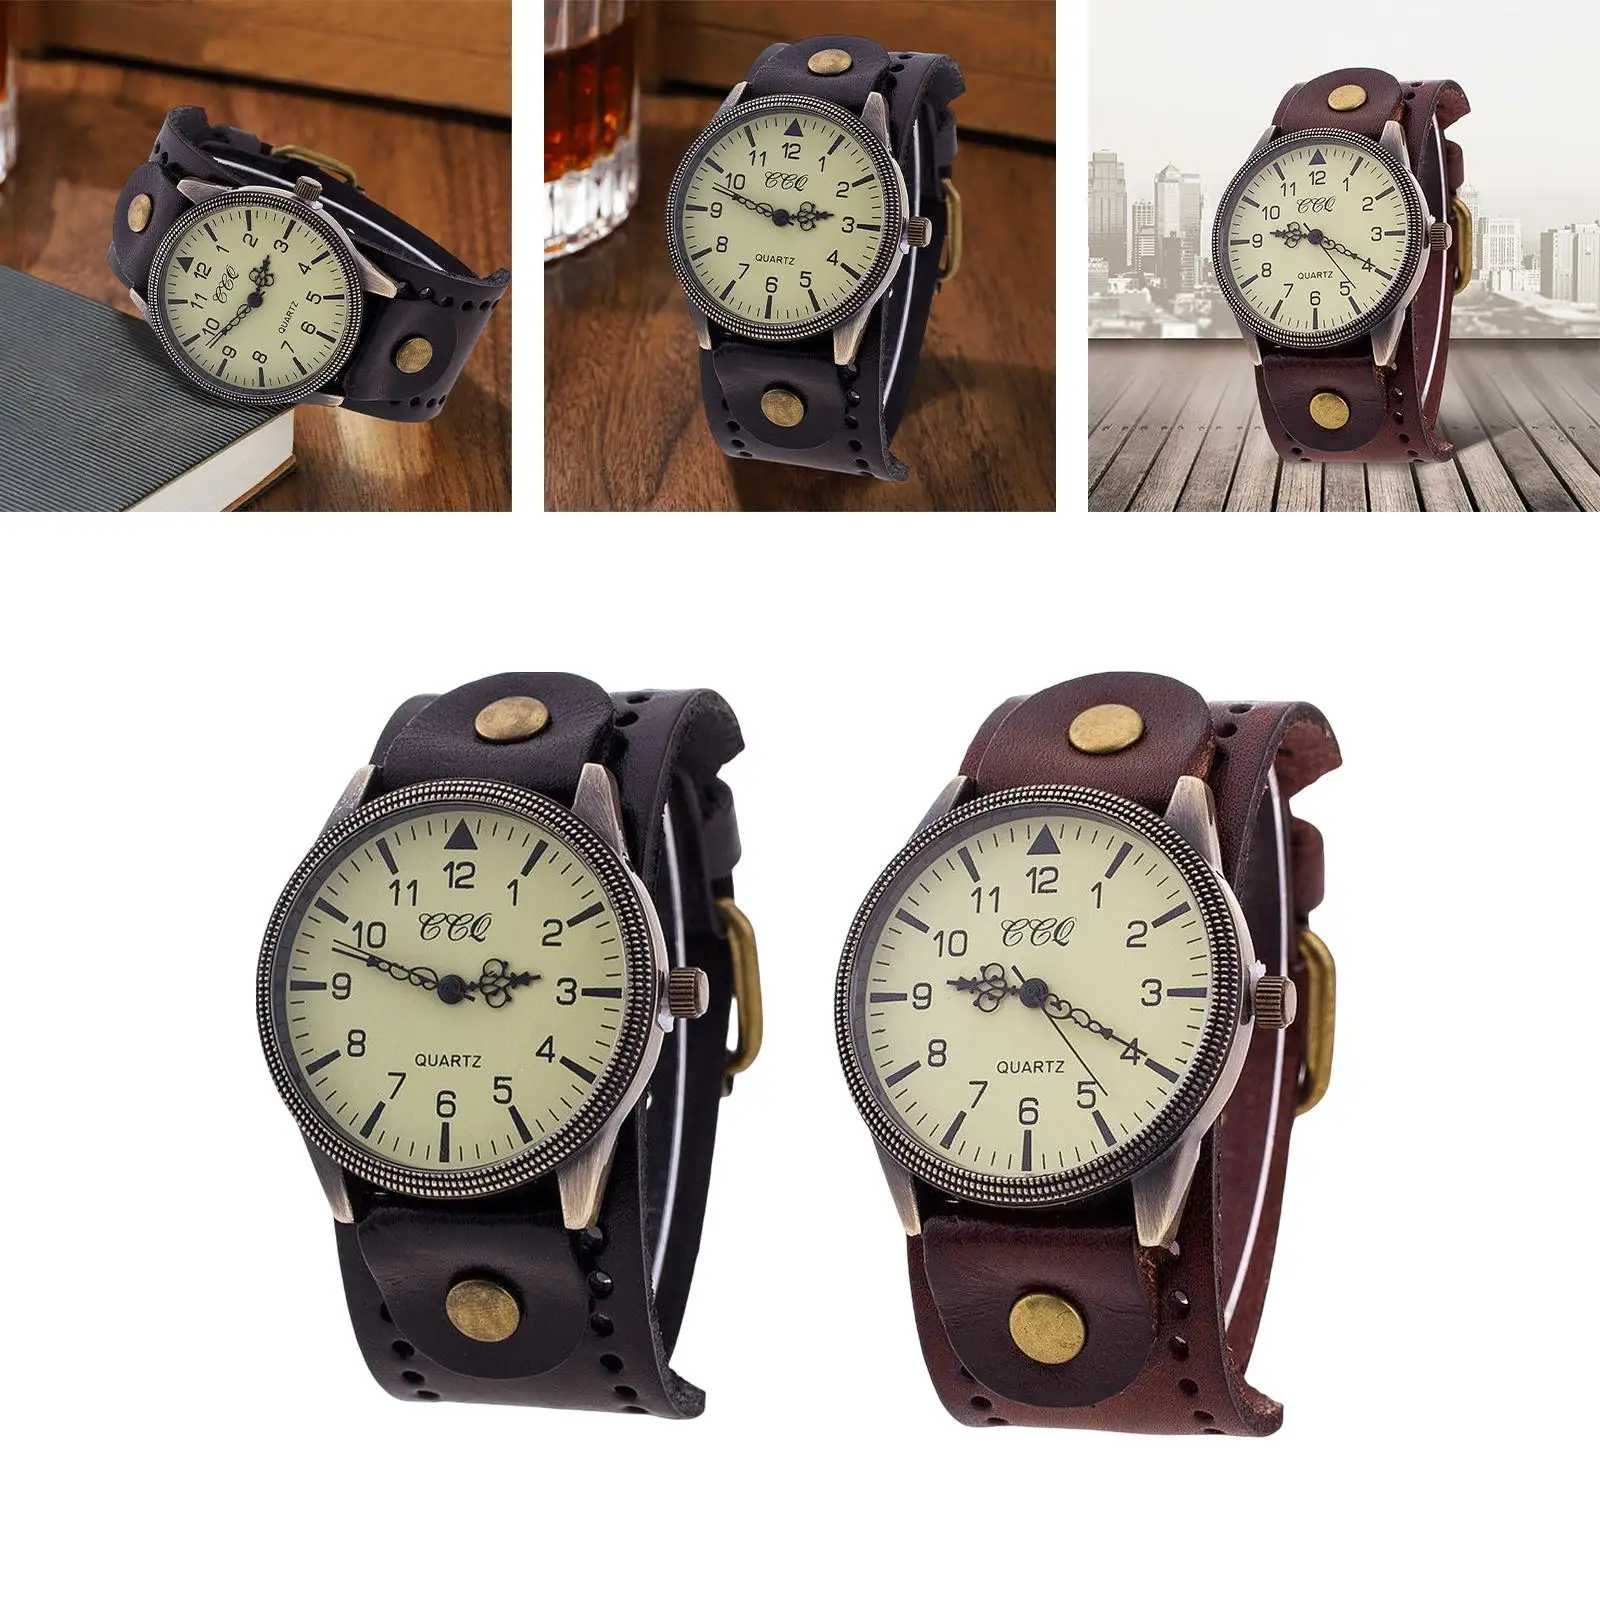 Antique Bracelet Watch PU Leather Wide Leather Strap for Bracelet Watch Band